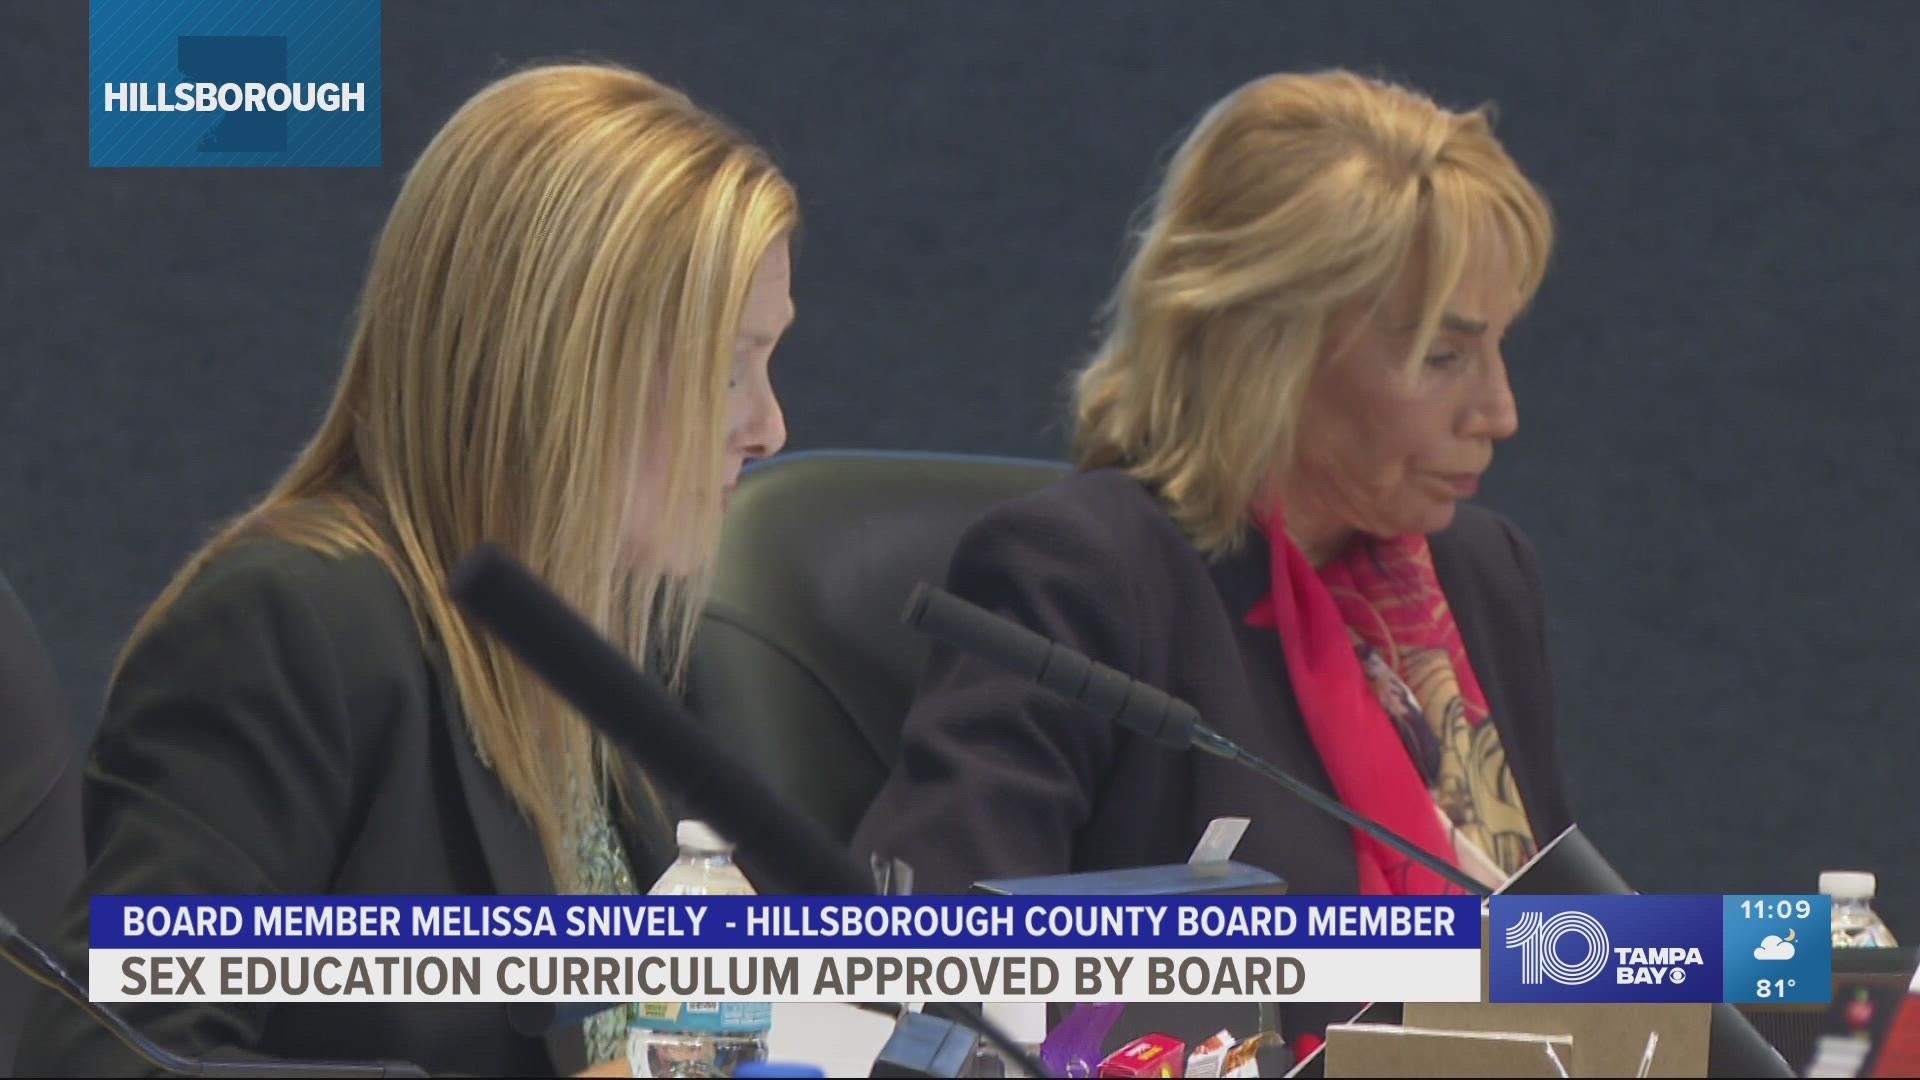 While parents and board members didn't agree, the majority of the board voted to approve sex education curriculum for students.